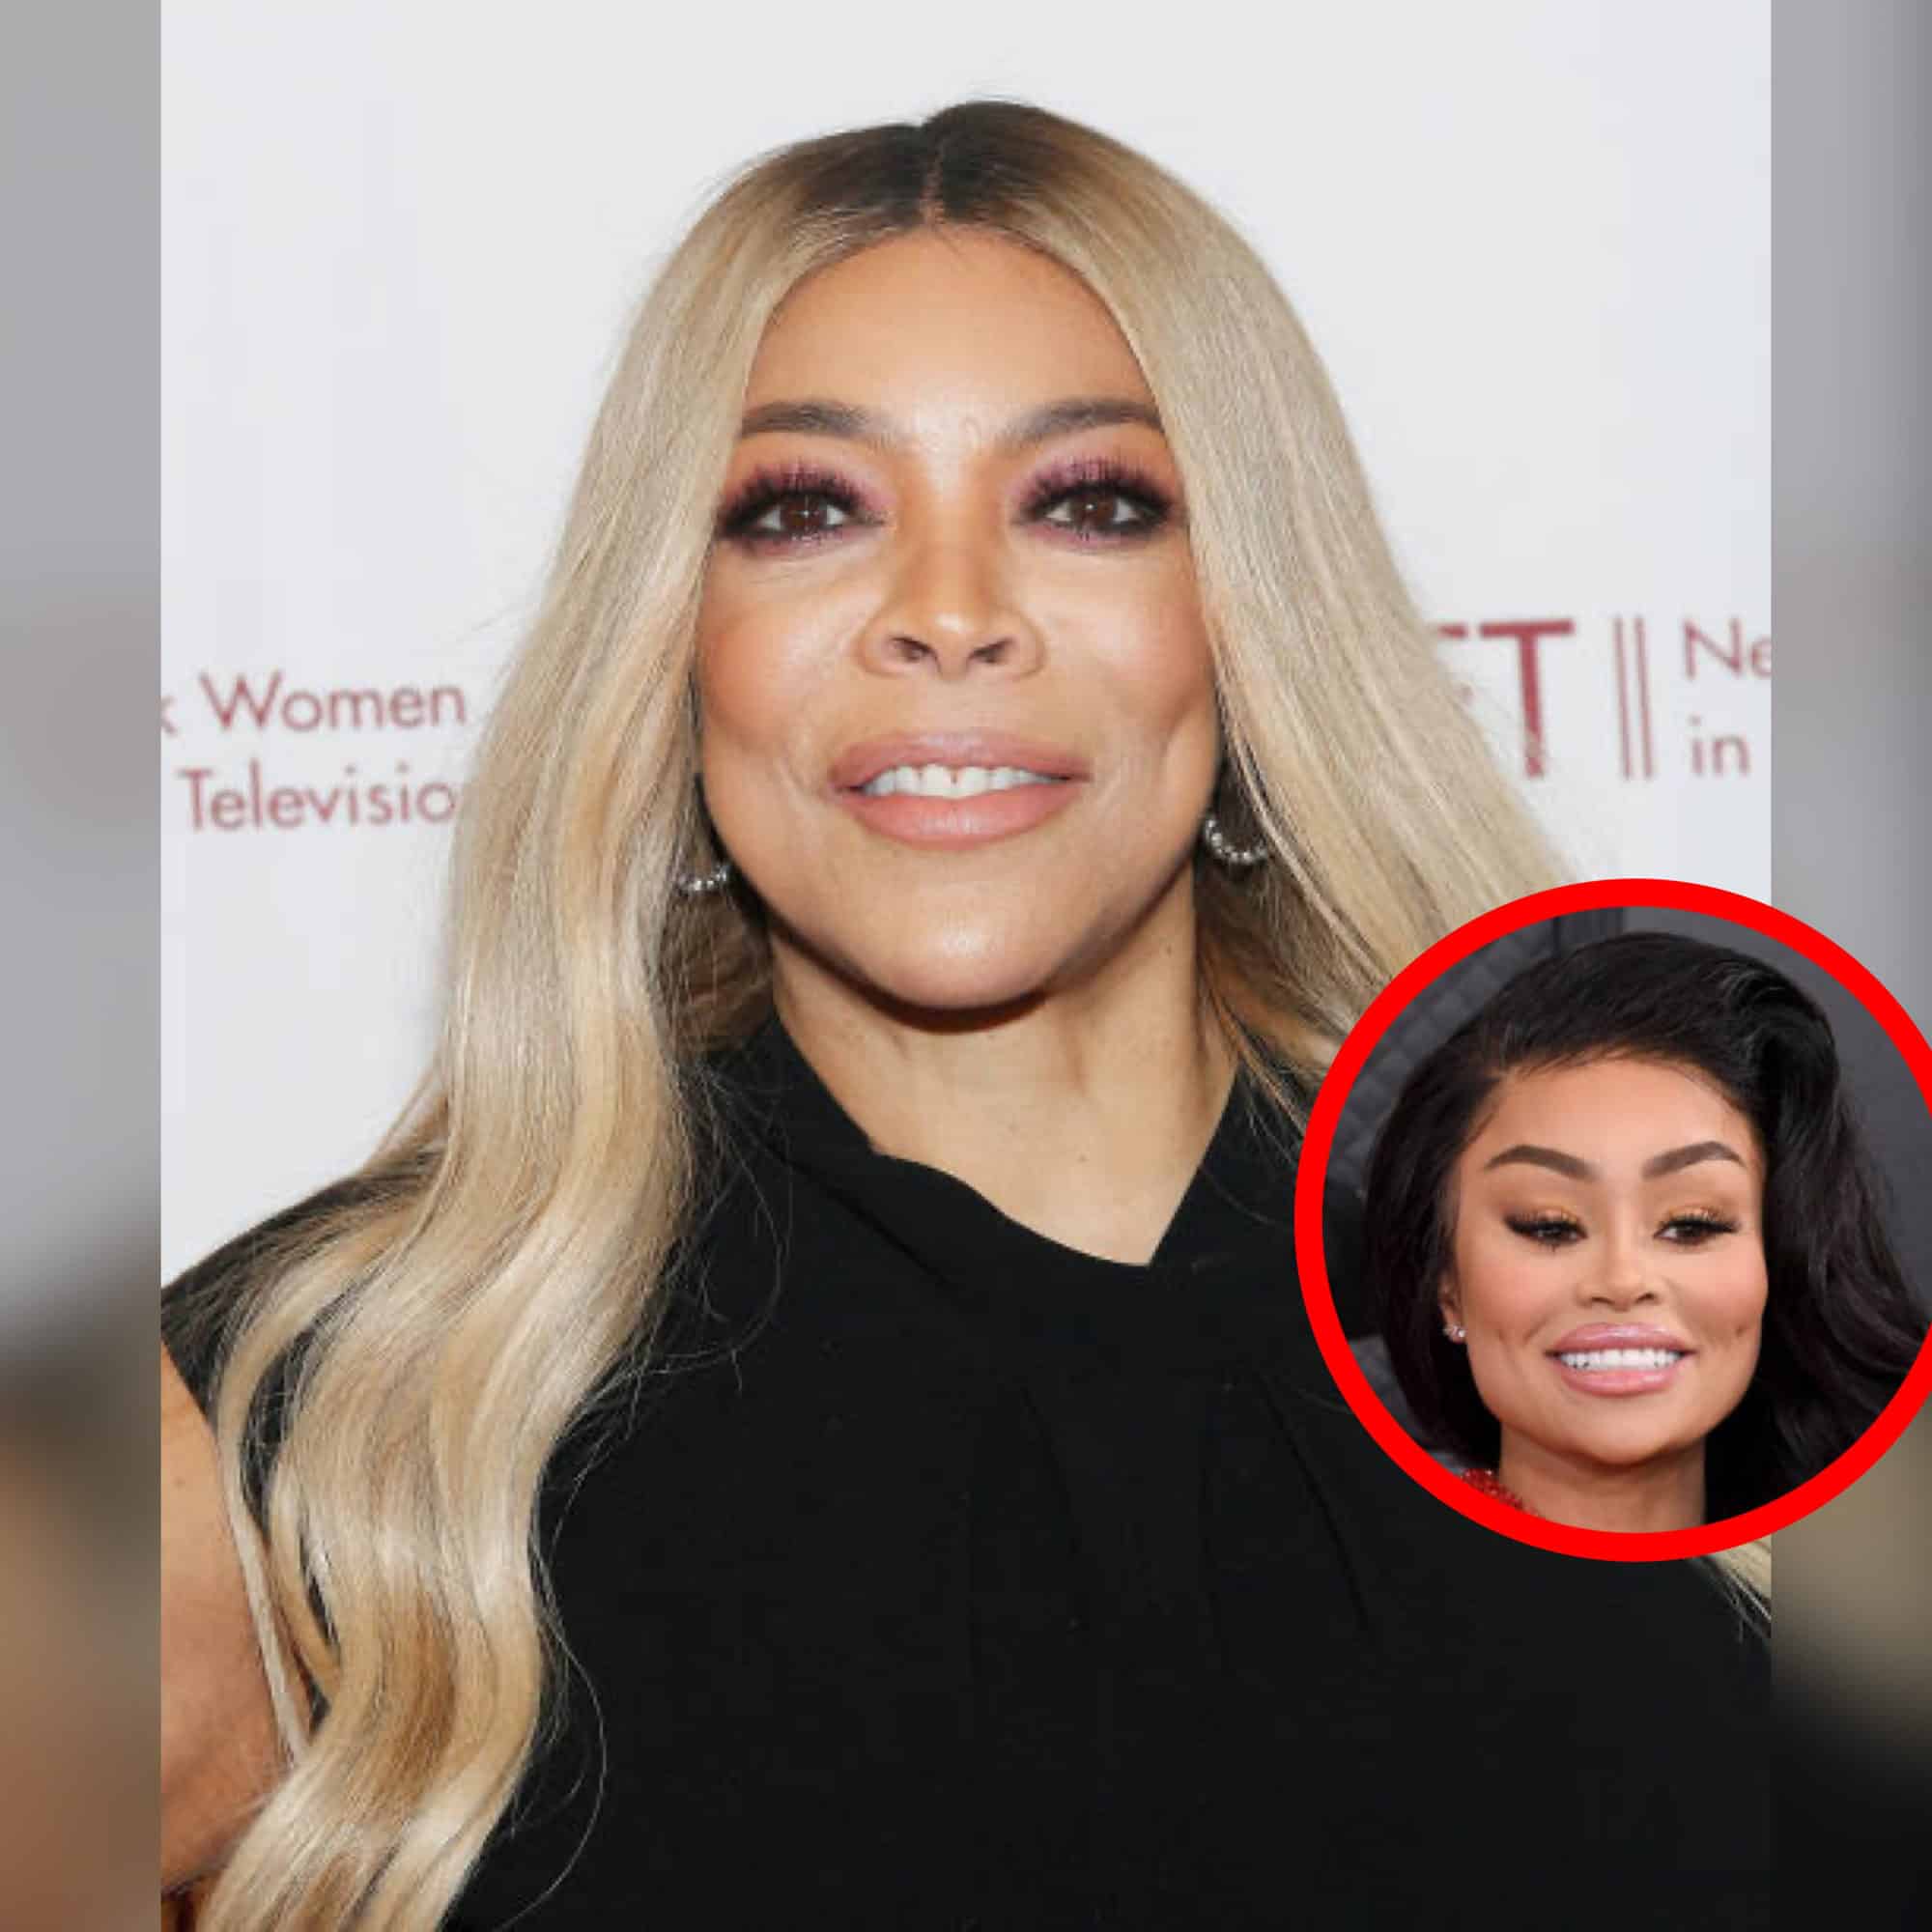 Wendy Williams Alleges Blac Chyna Texted Her & Stated She Needed A Place To Live-Blac Chyna Seemingly Responds With A Driveway Full Of Cars (Video)